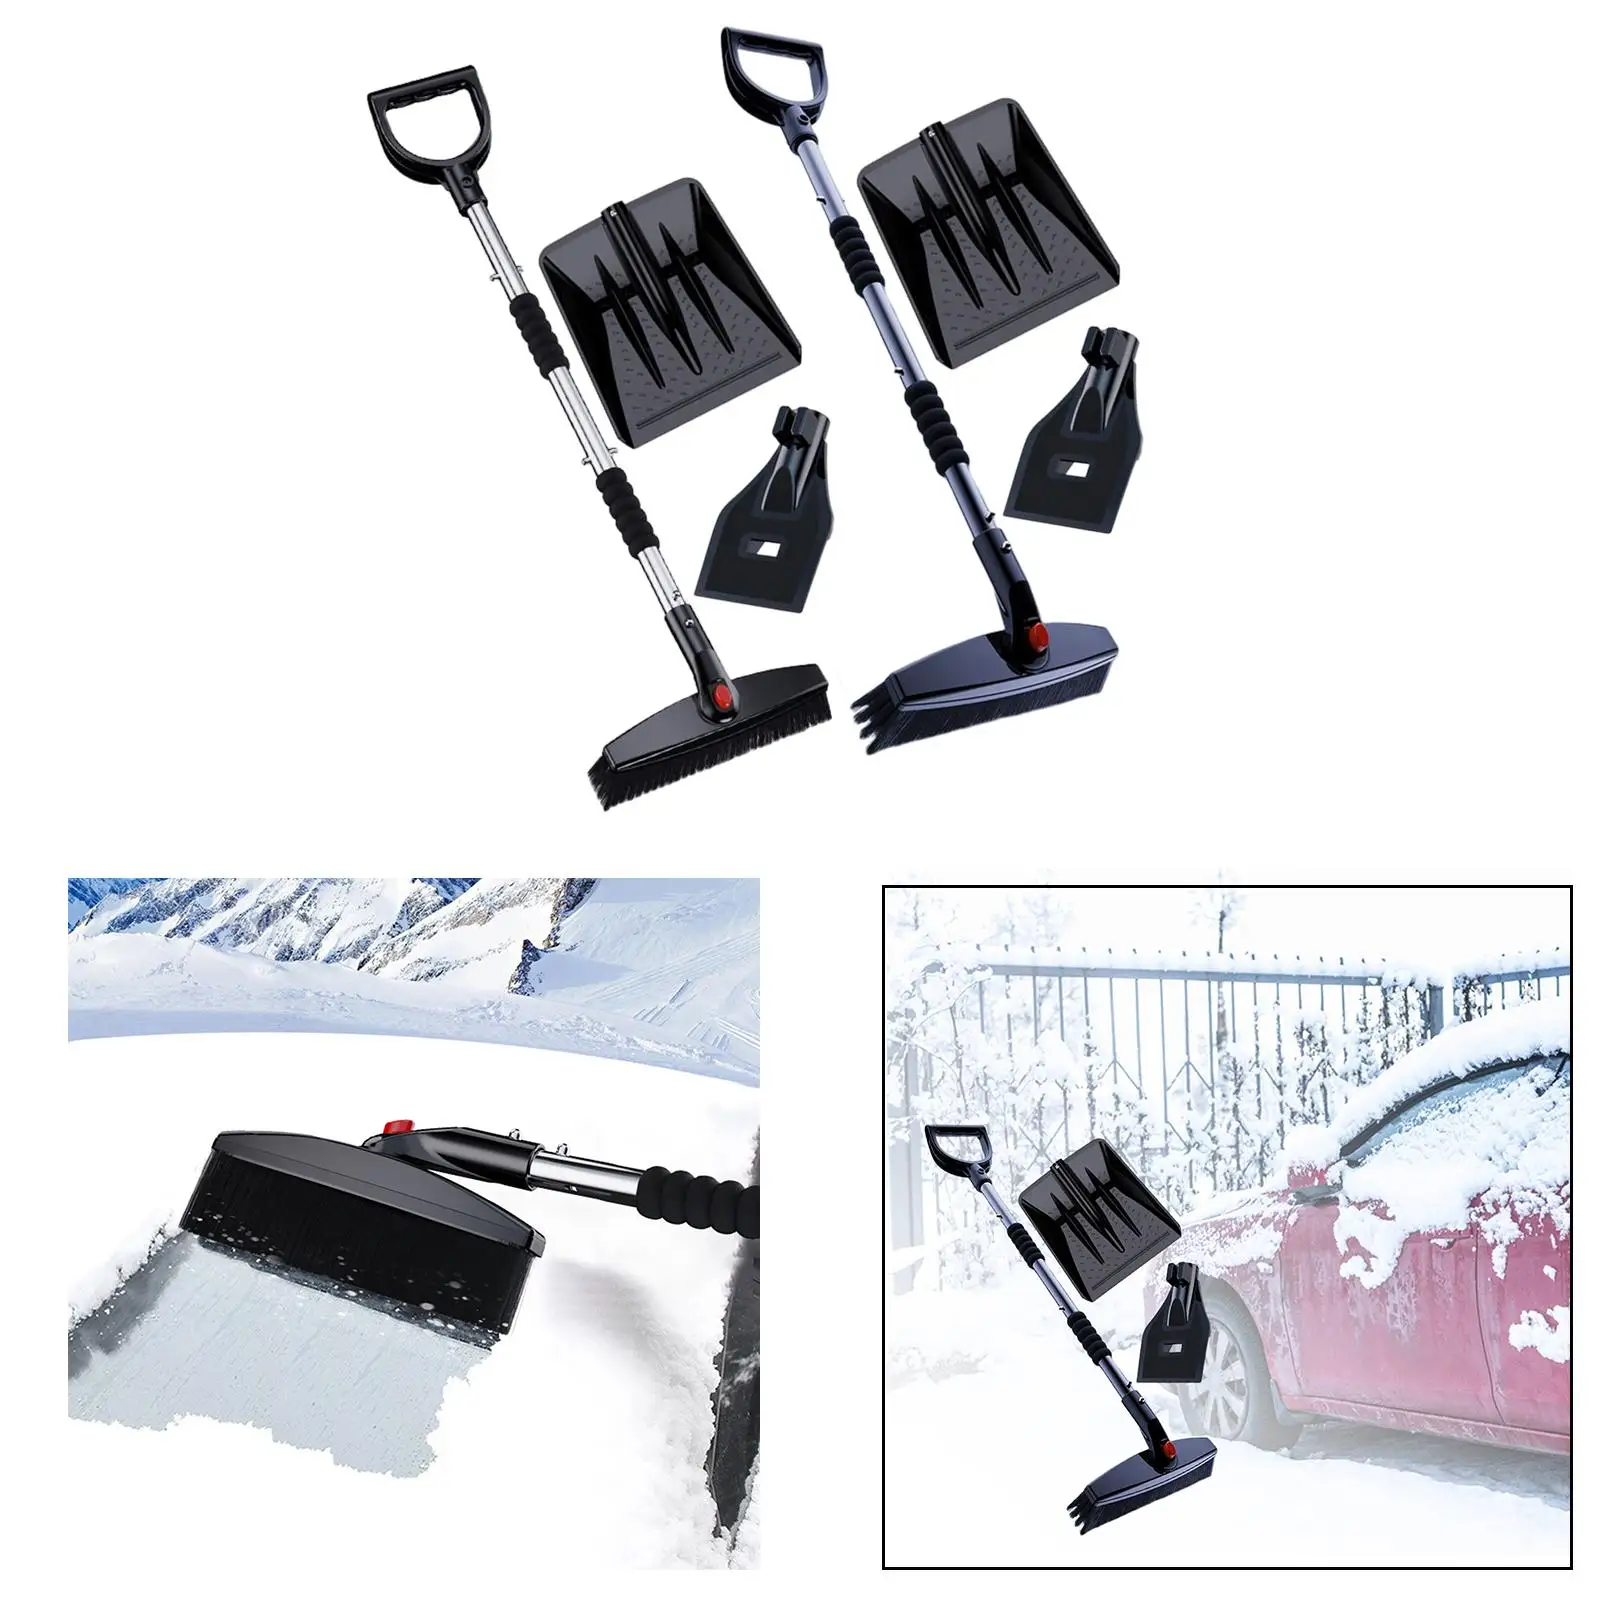 Professional Snow Removal Tool Set Snow Scraper Brush Telescopic Adjustable Car Window Snow Cleaner for Car Auto Truck Vehicles